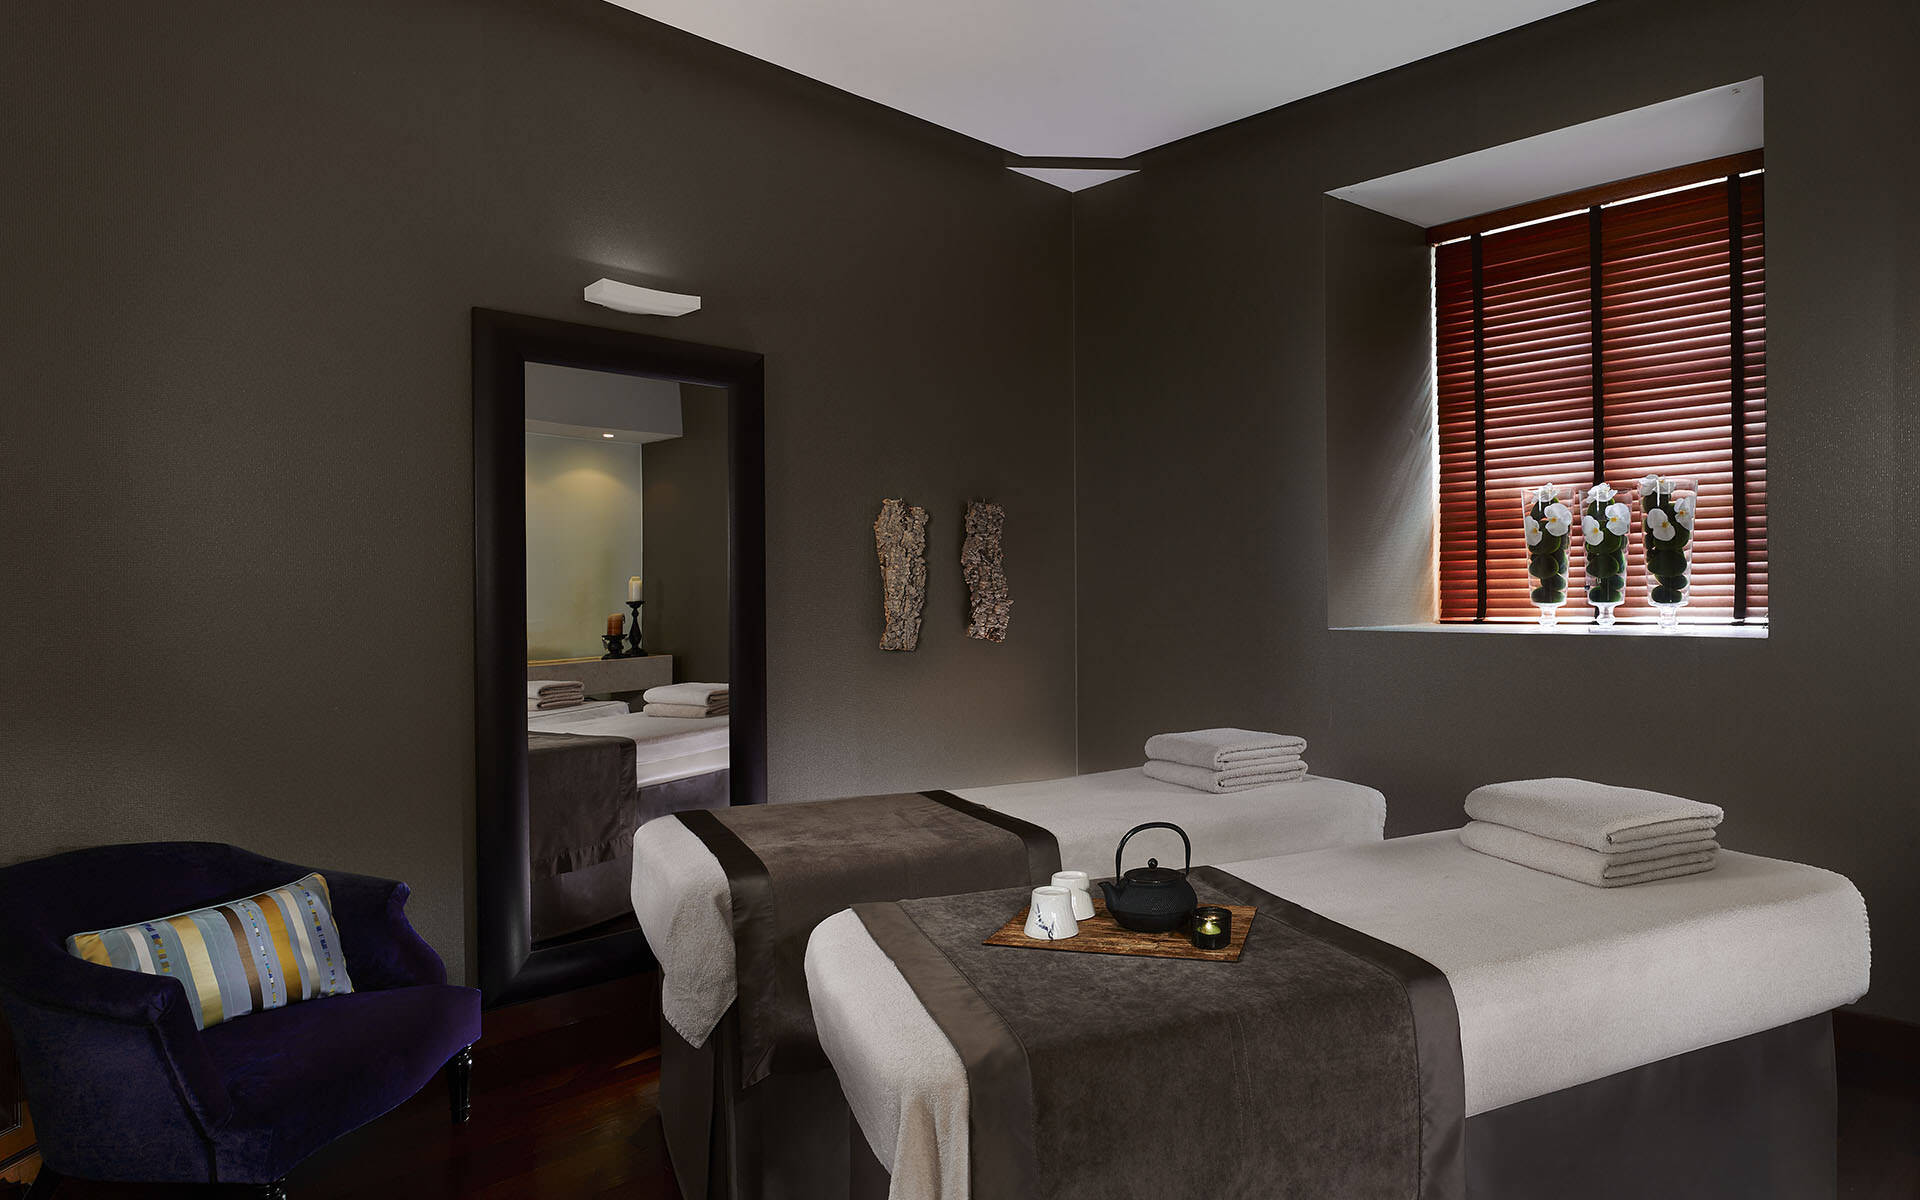 Spa image from London based hotel photographer